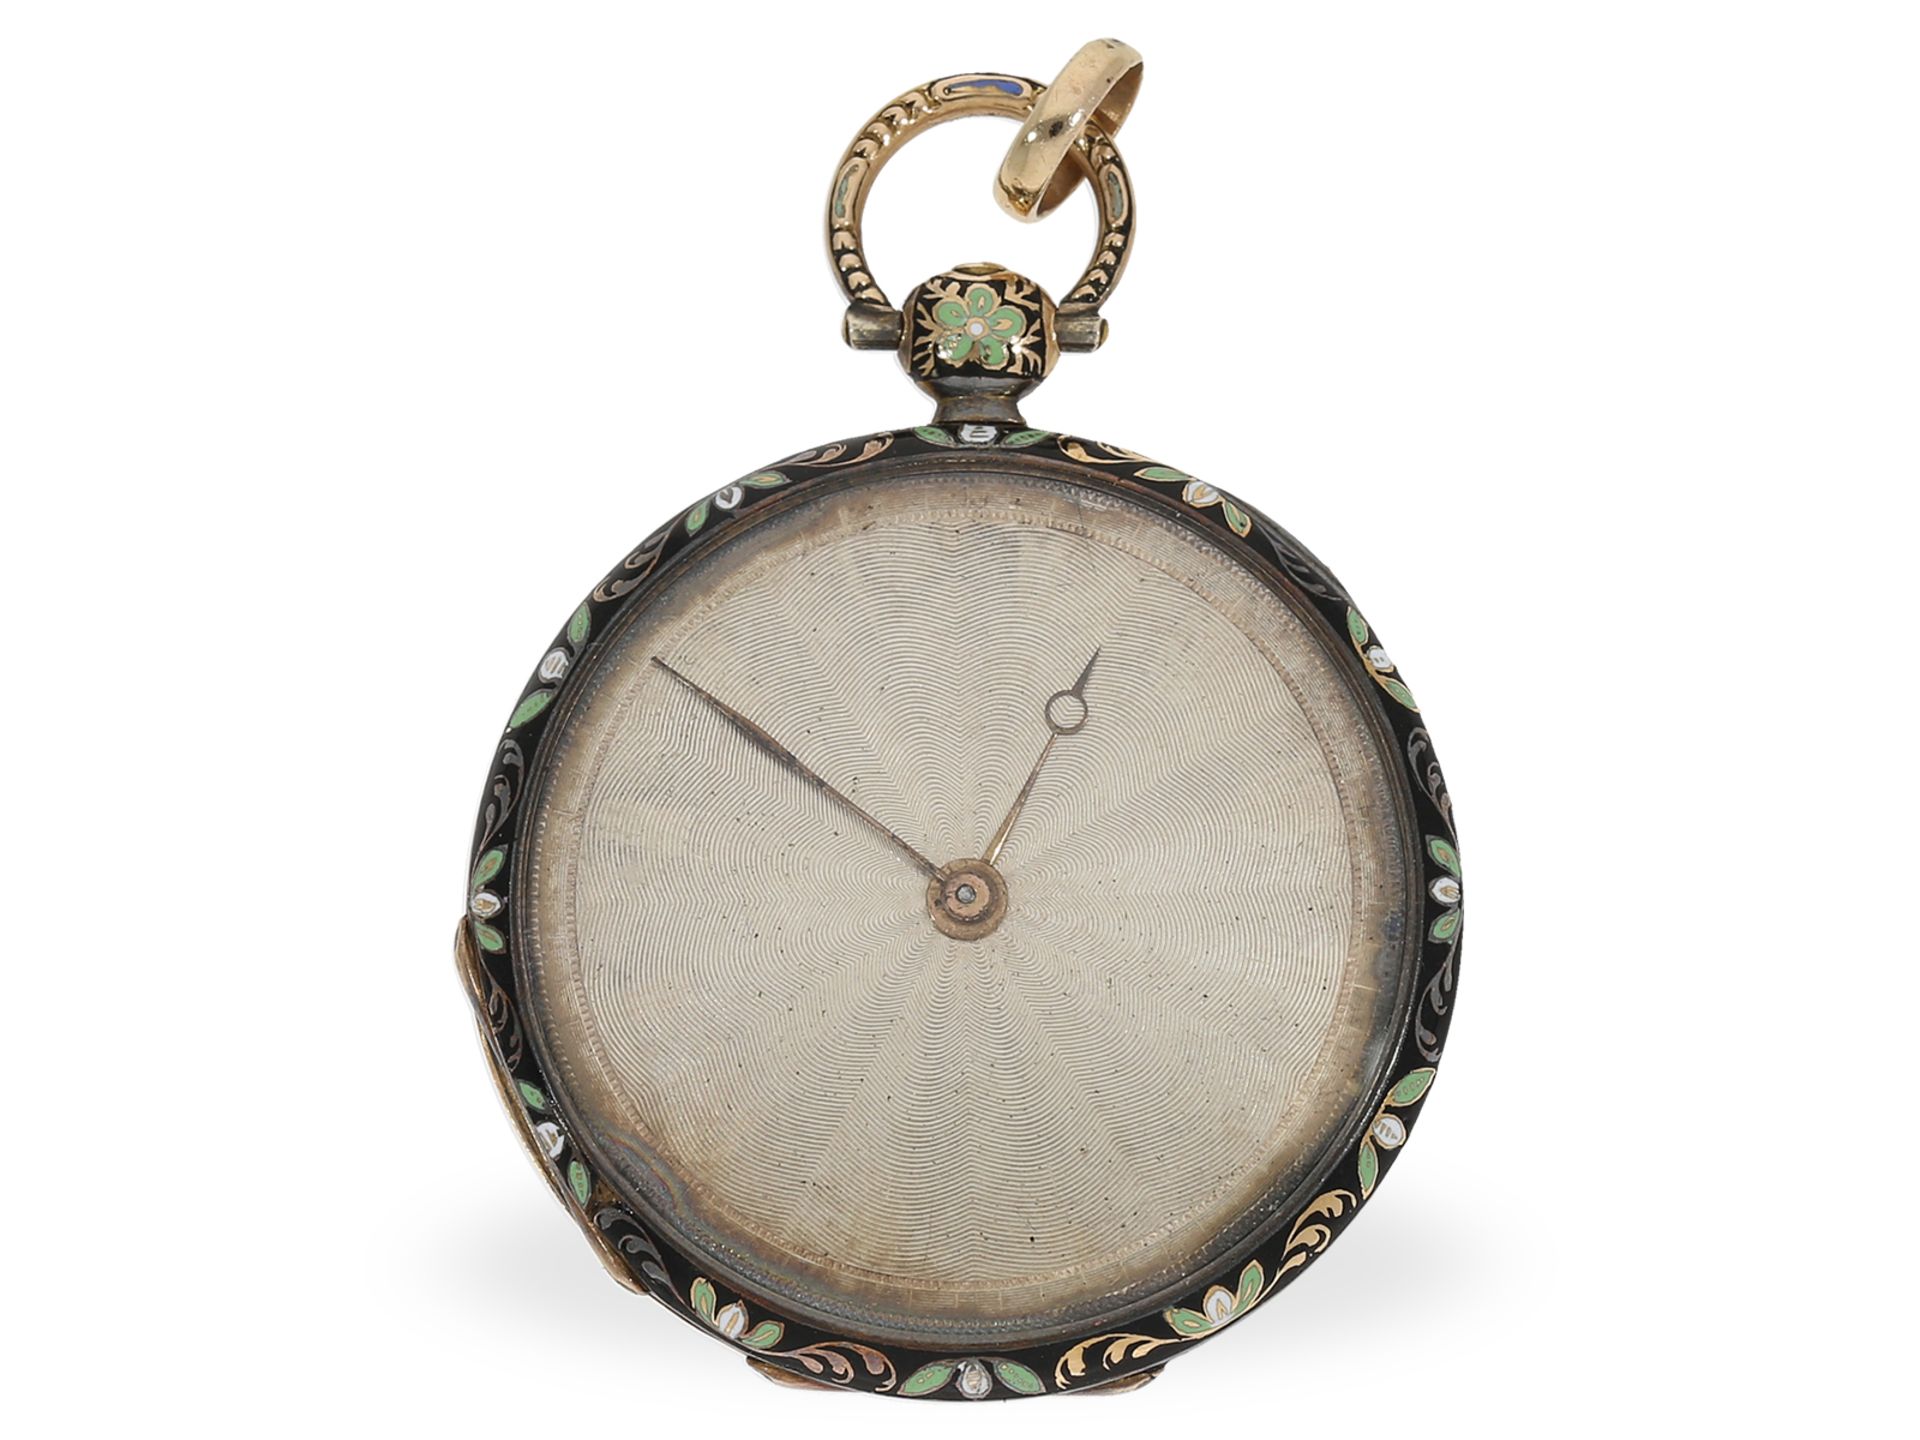 Pocket watch: magnificent gold/enamel lepine with original box and gold key, ca. 1820 - Image 3 of 9